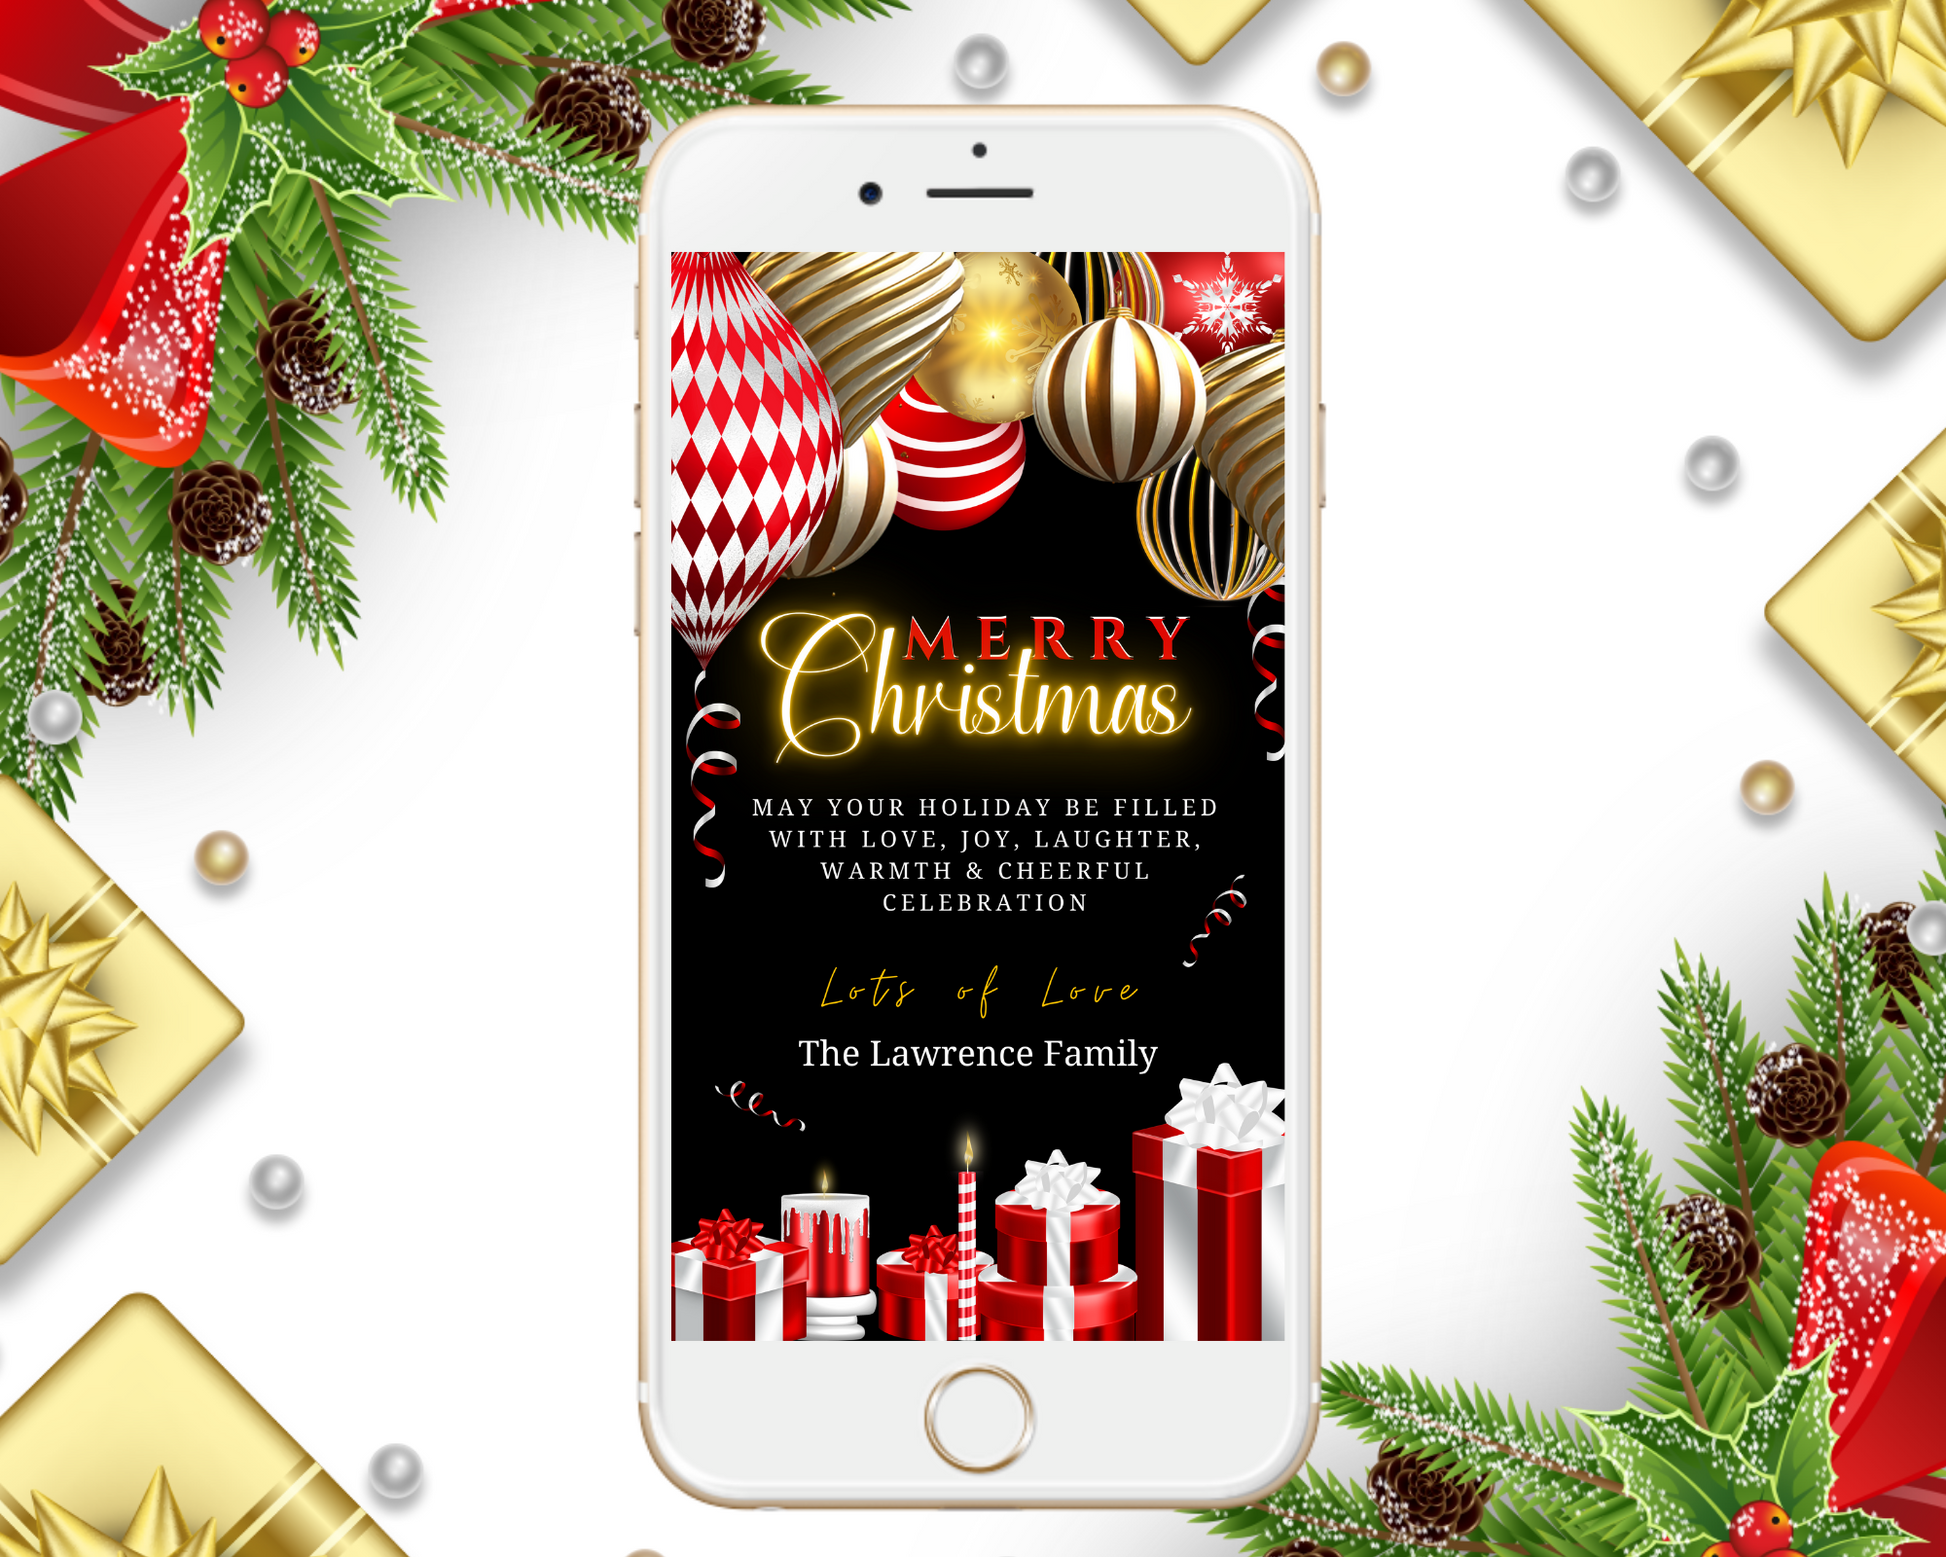 Gold Red Neon Presents Merry Christmas Greeting Ecard displayed on a smartphone with festive decorations including pinecones and gift boxes.